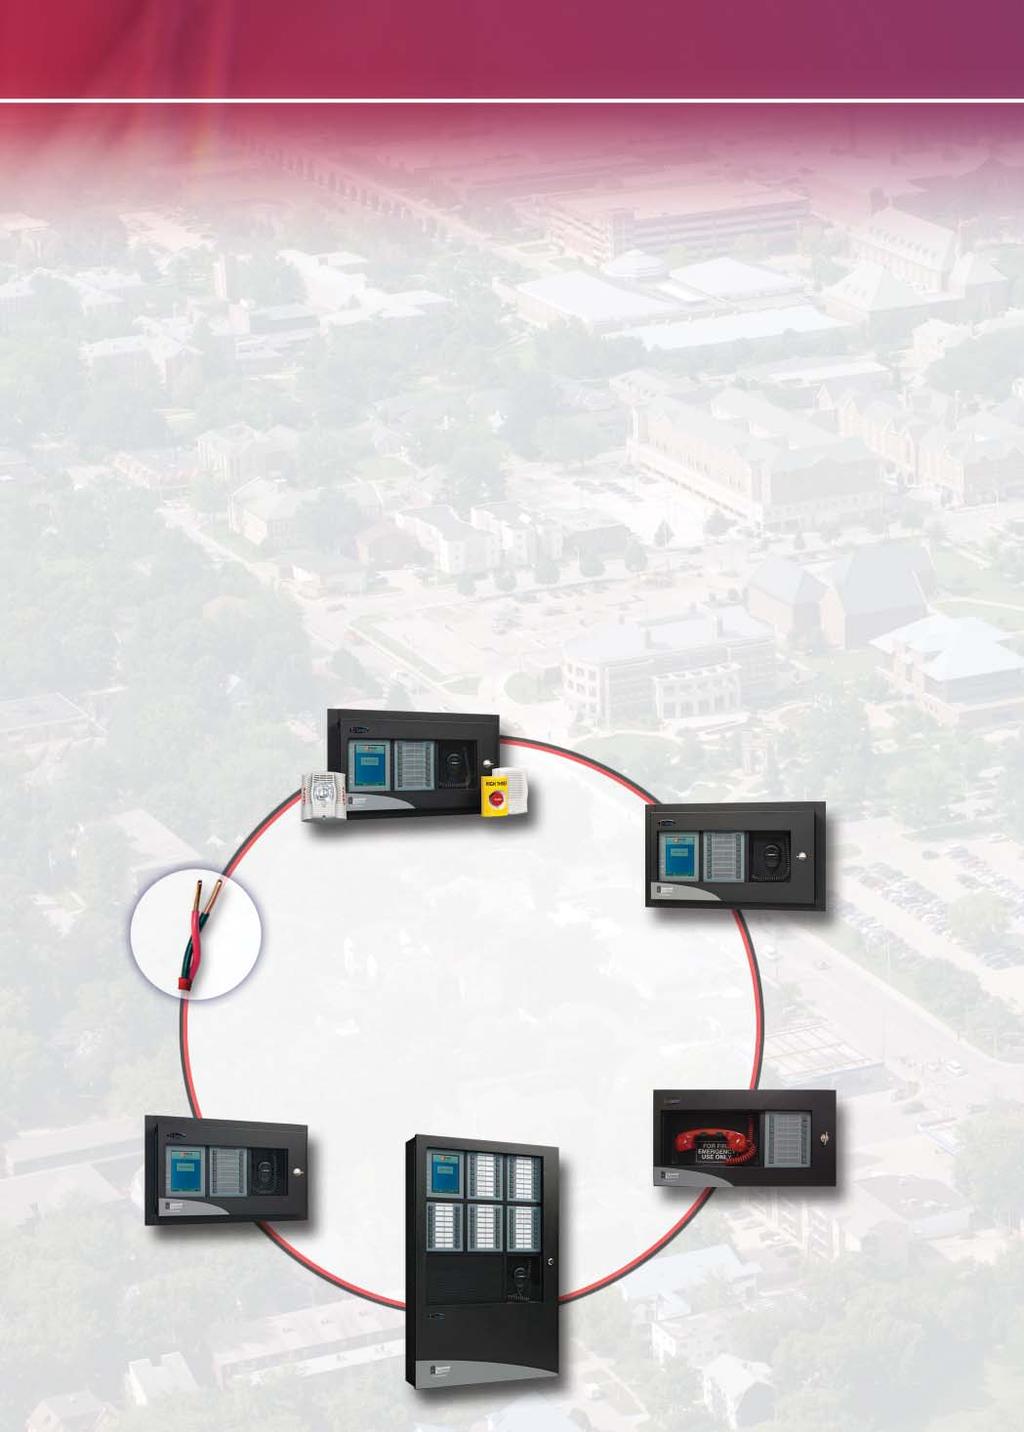 Reliability and Survivability Outperform the Rest The strength of the E3 Series, Expandable Emergency Evacuation system is its ability to communicate real-time information that directs people to take